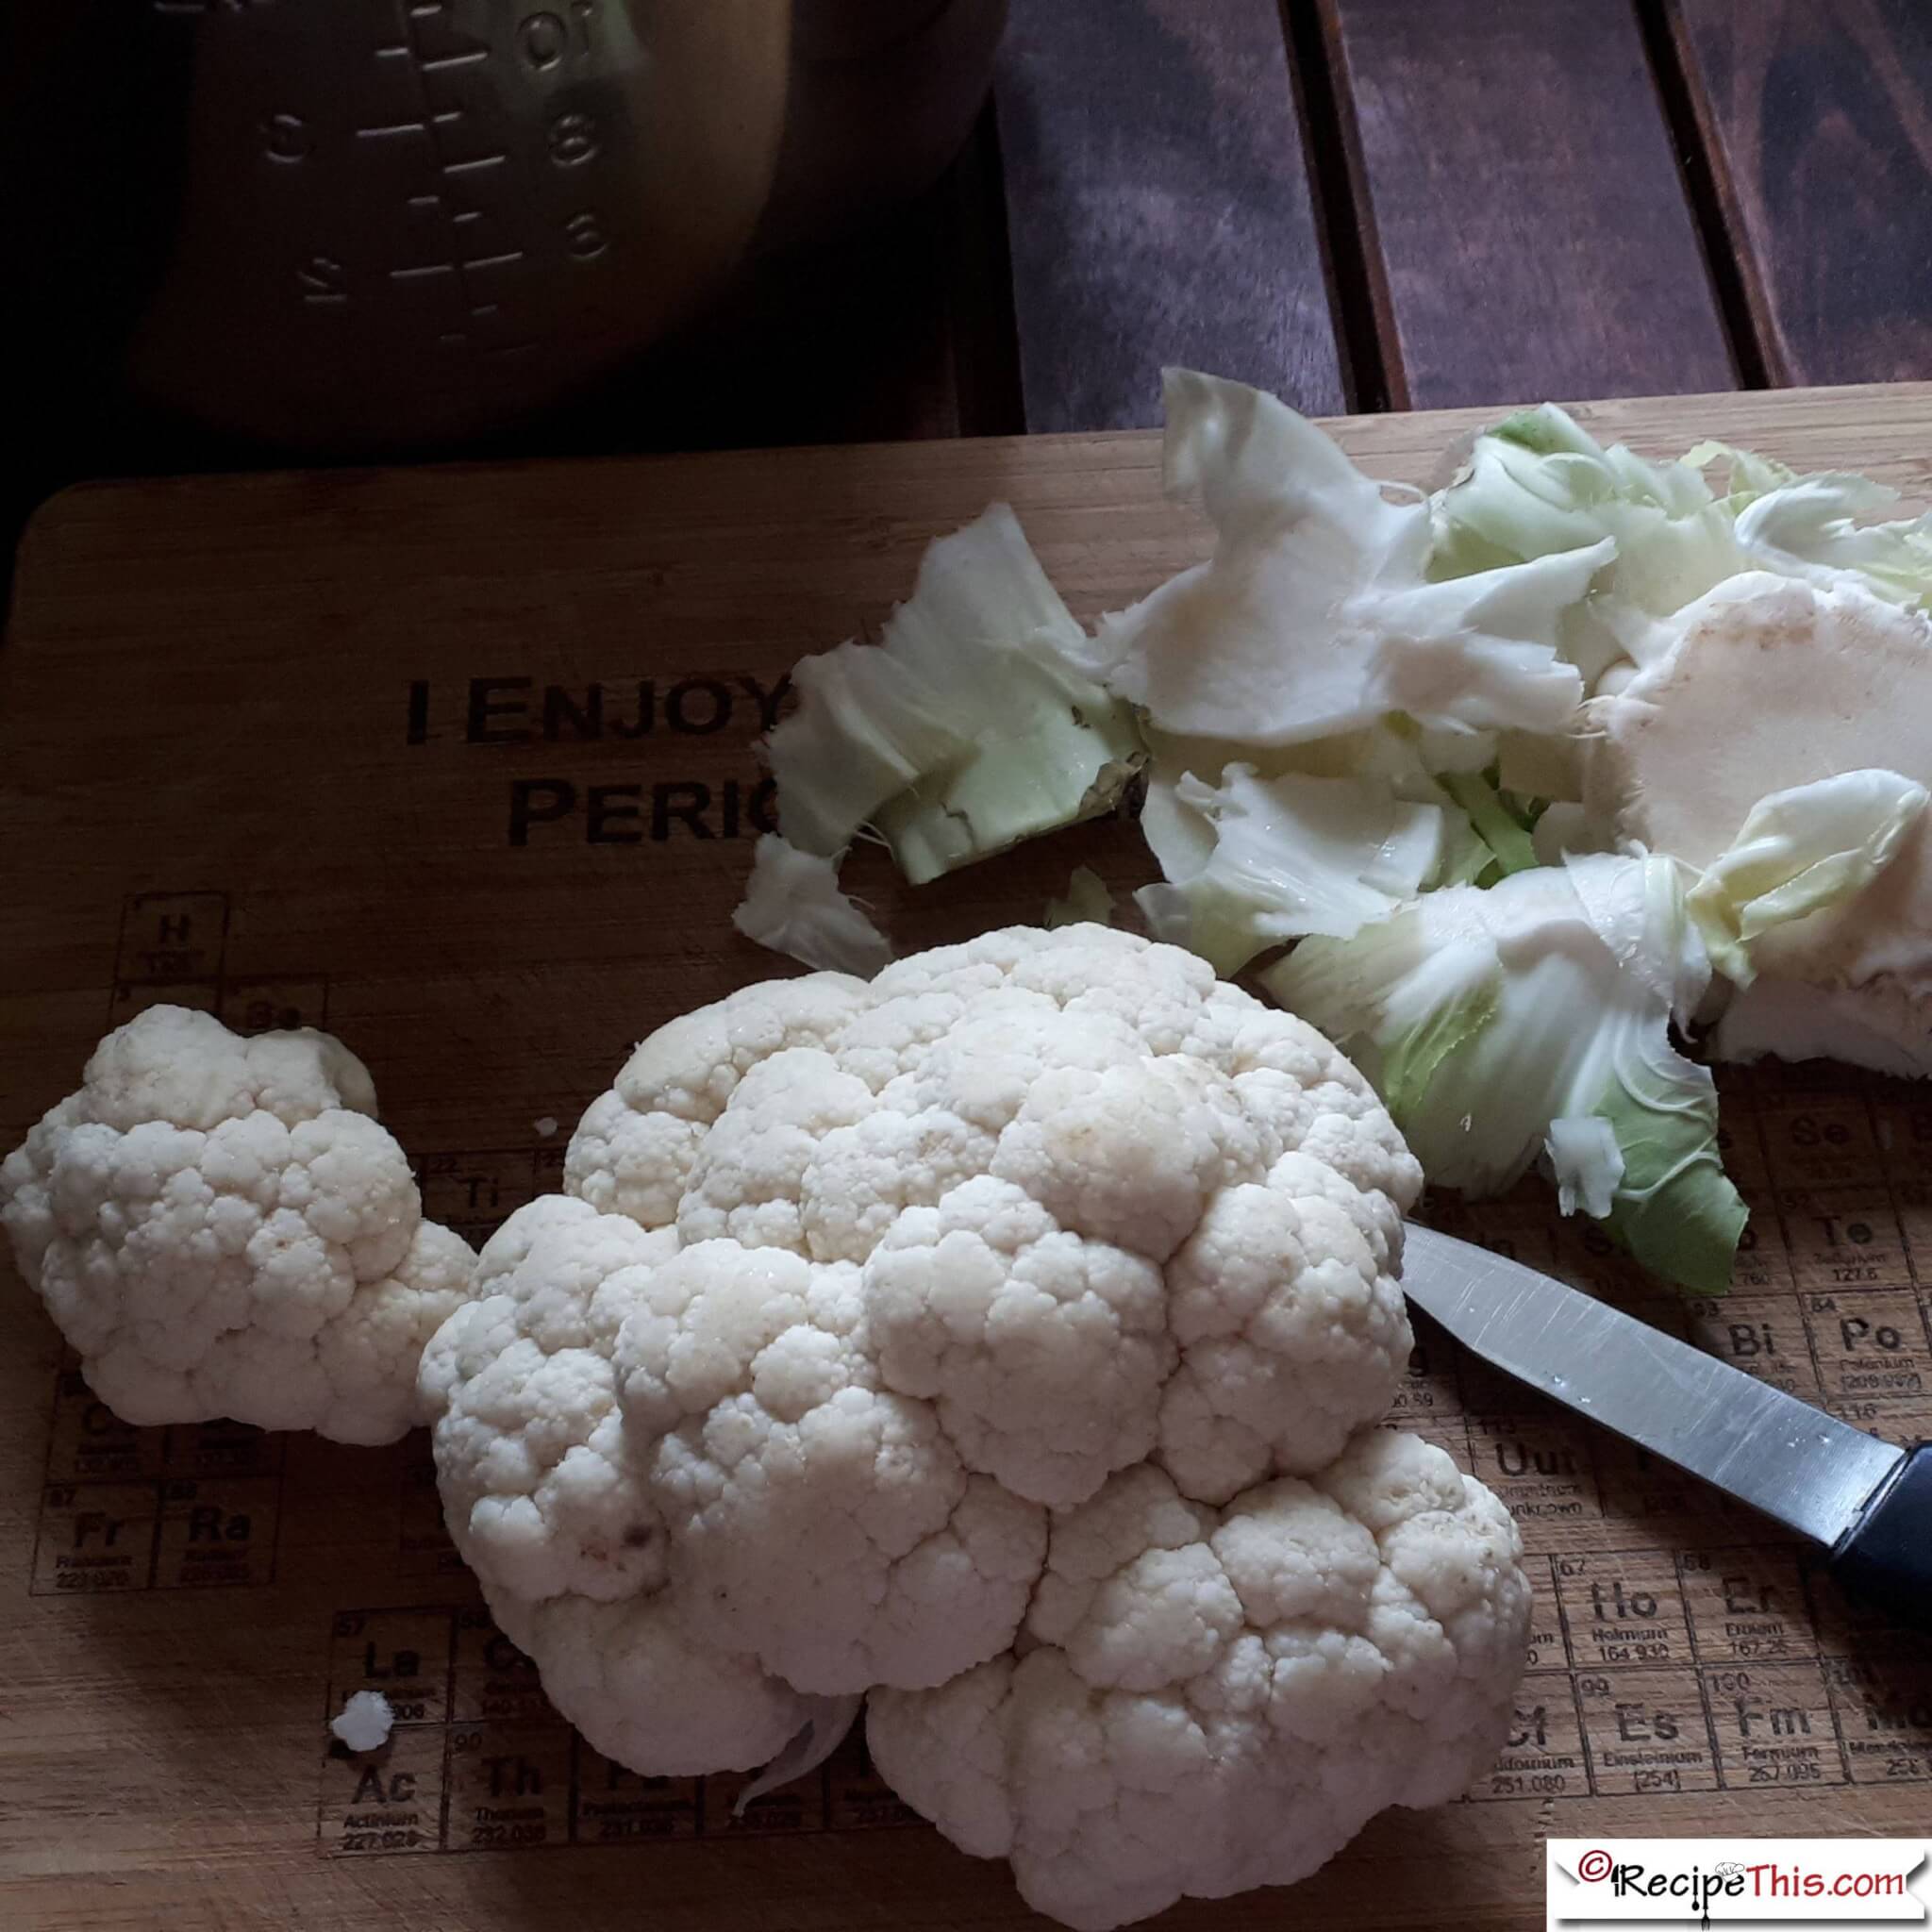 Instant Pot Cauliflower – Instant Pot Pressure Cooker 2 Minute Steamed Cauliflower from RecipeThis.com 